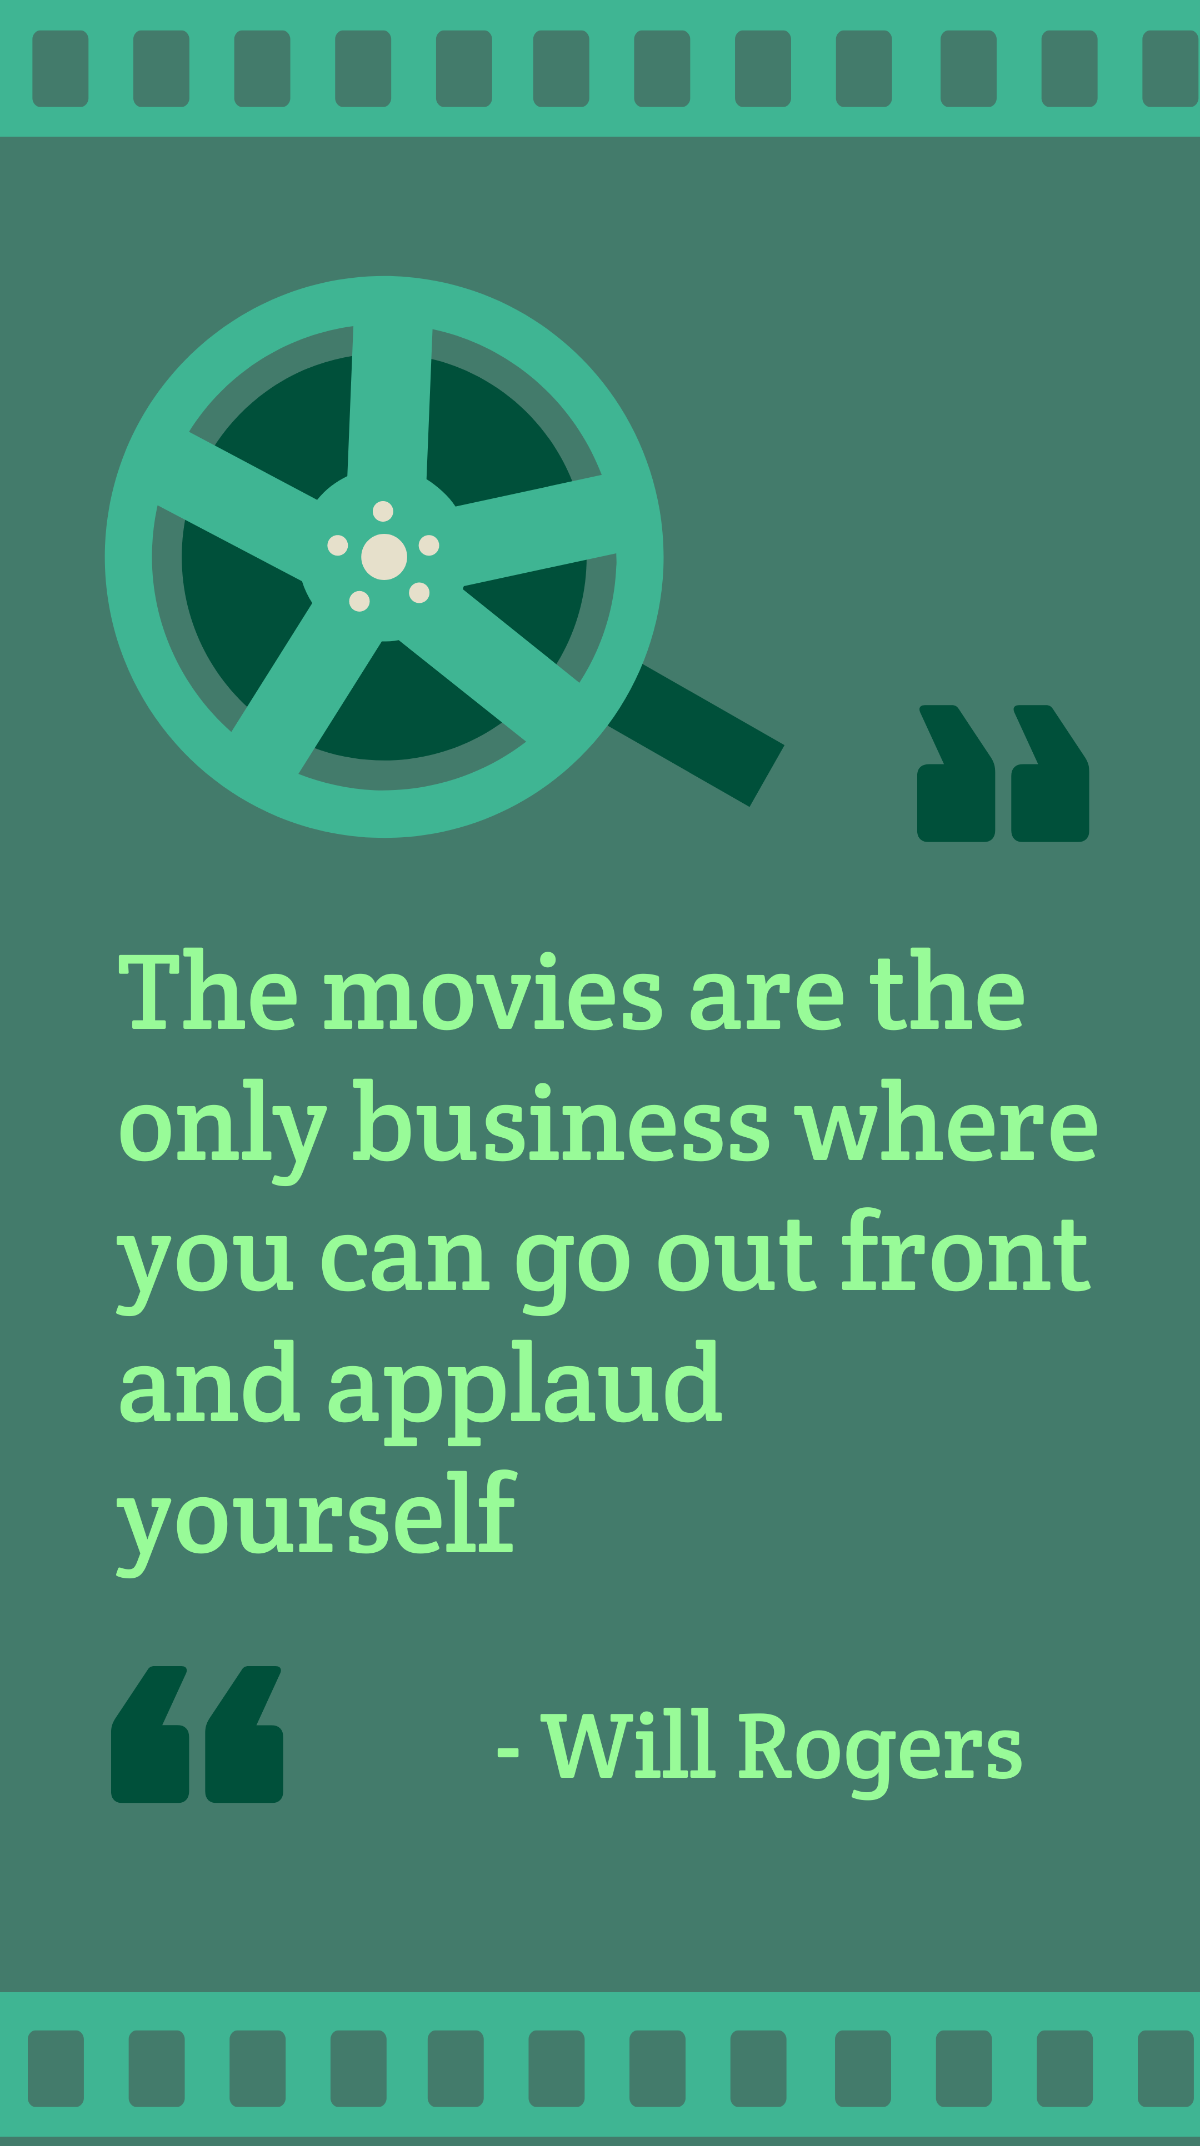 Will Rogers -The movies are the only business where you can go out front and applaud yourself